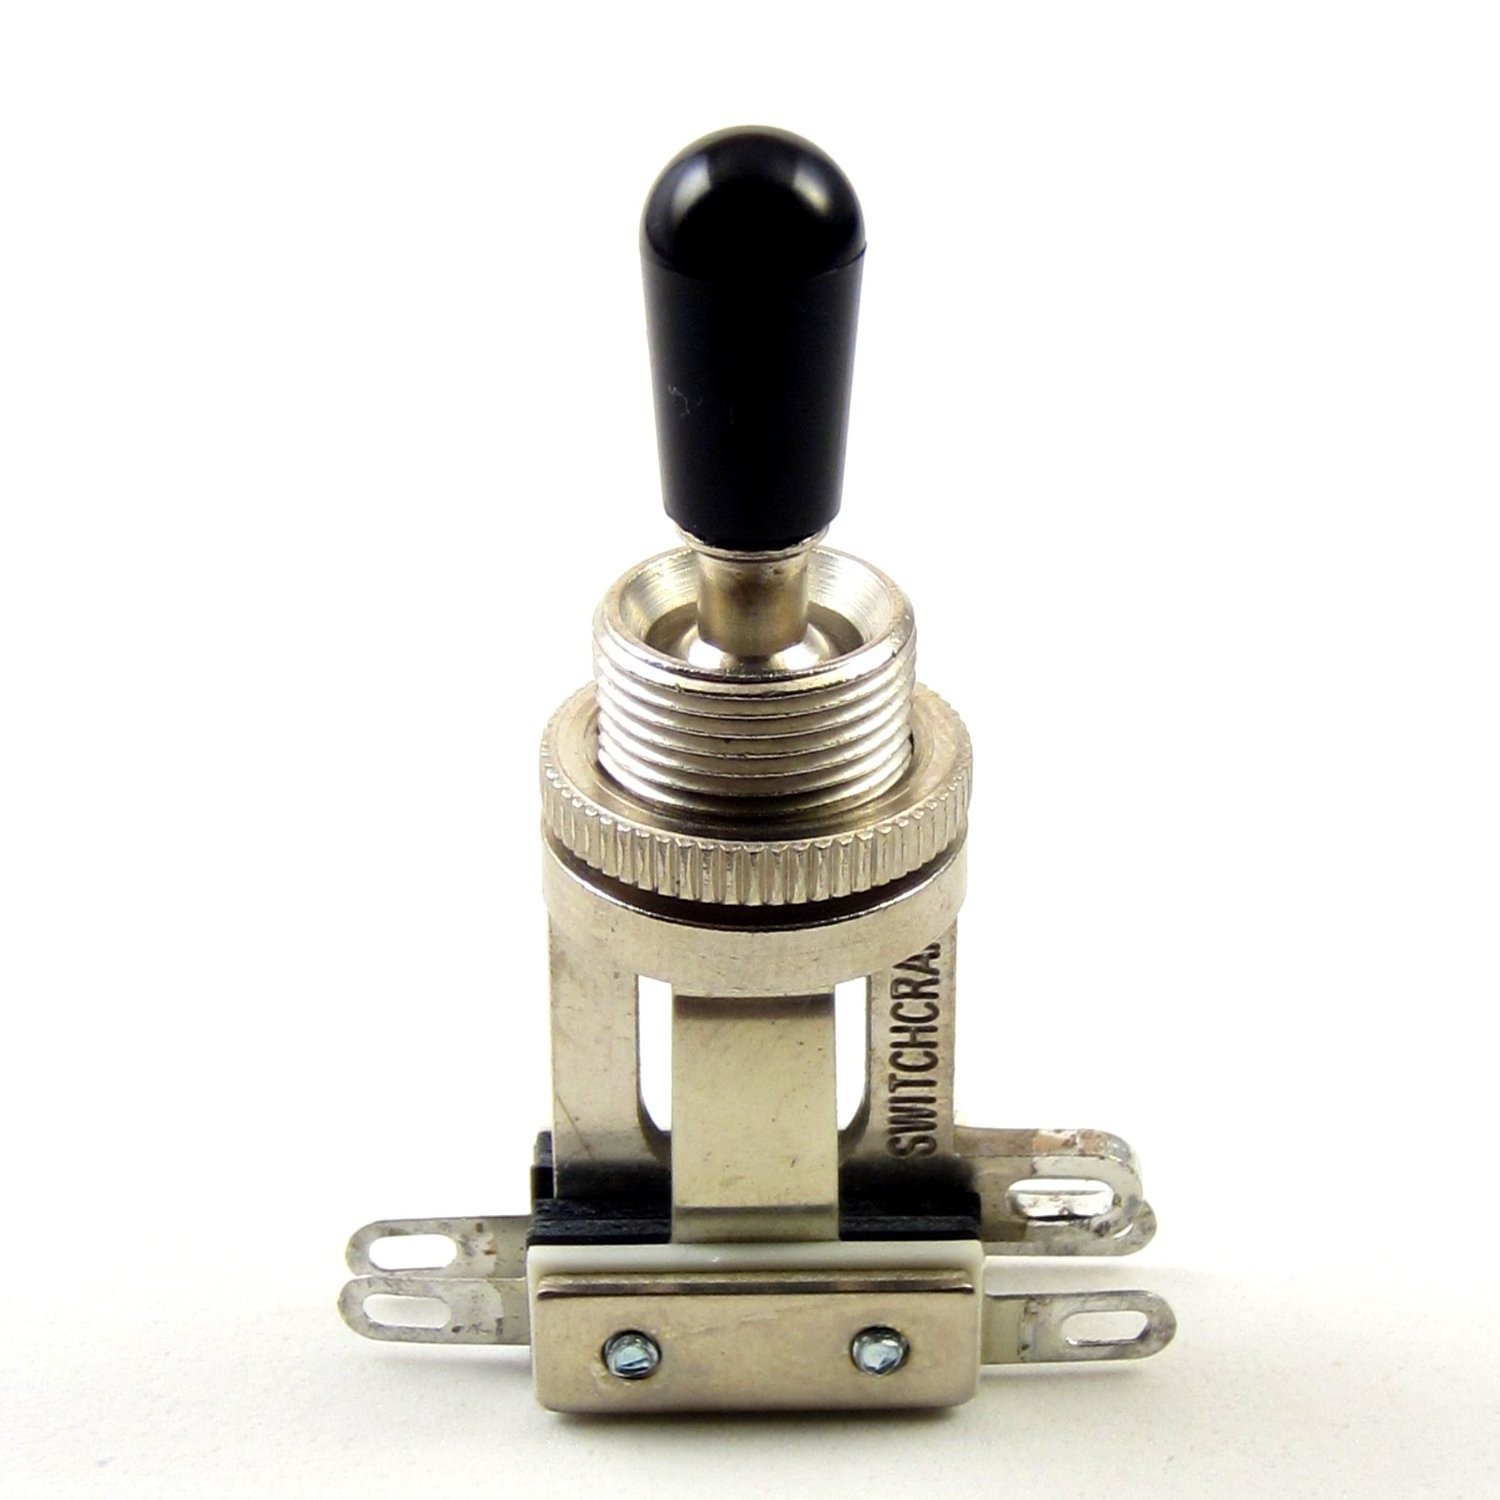 Switchcraft Short Frame Toggle Switch w Black Switch Tip